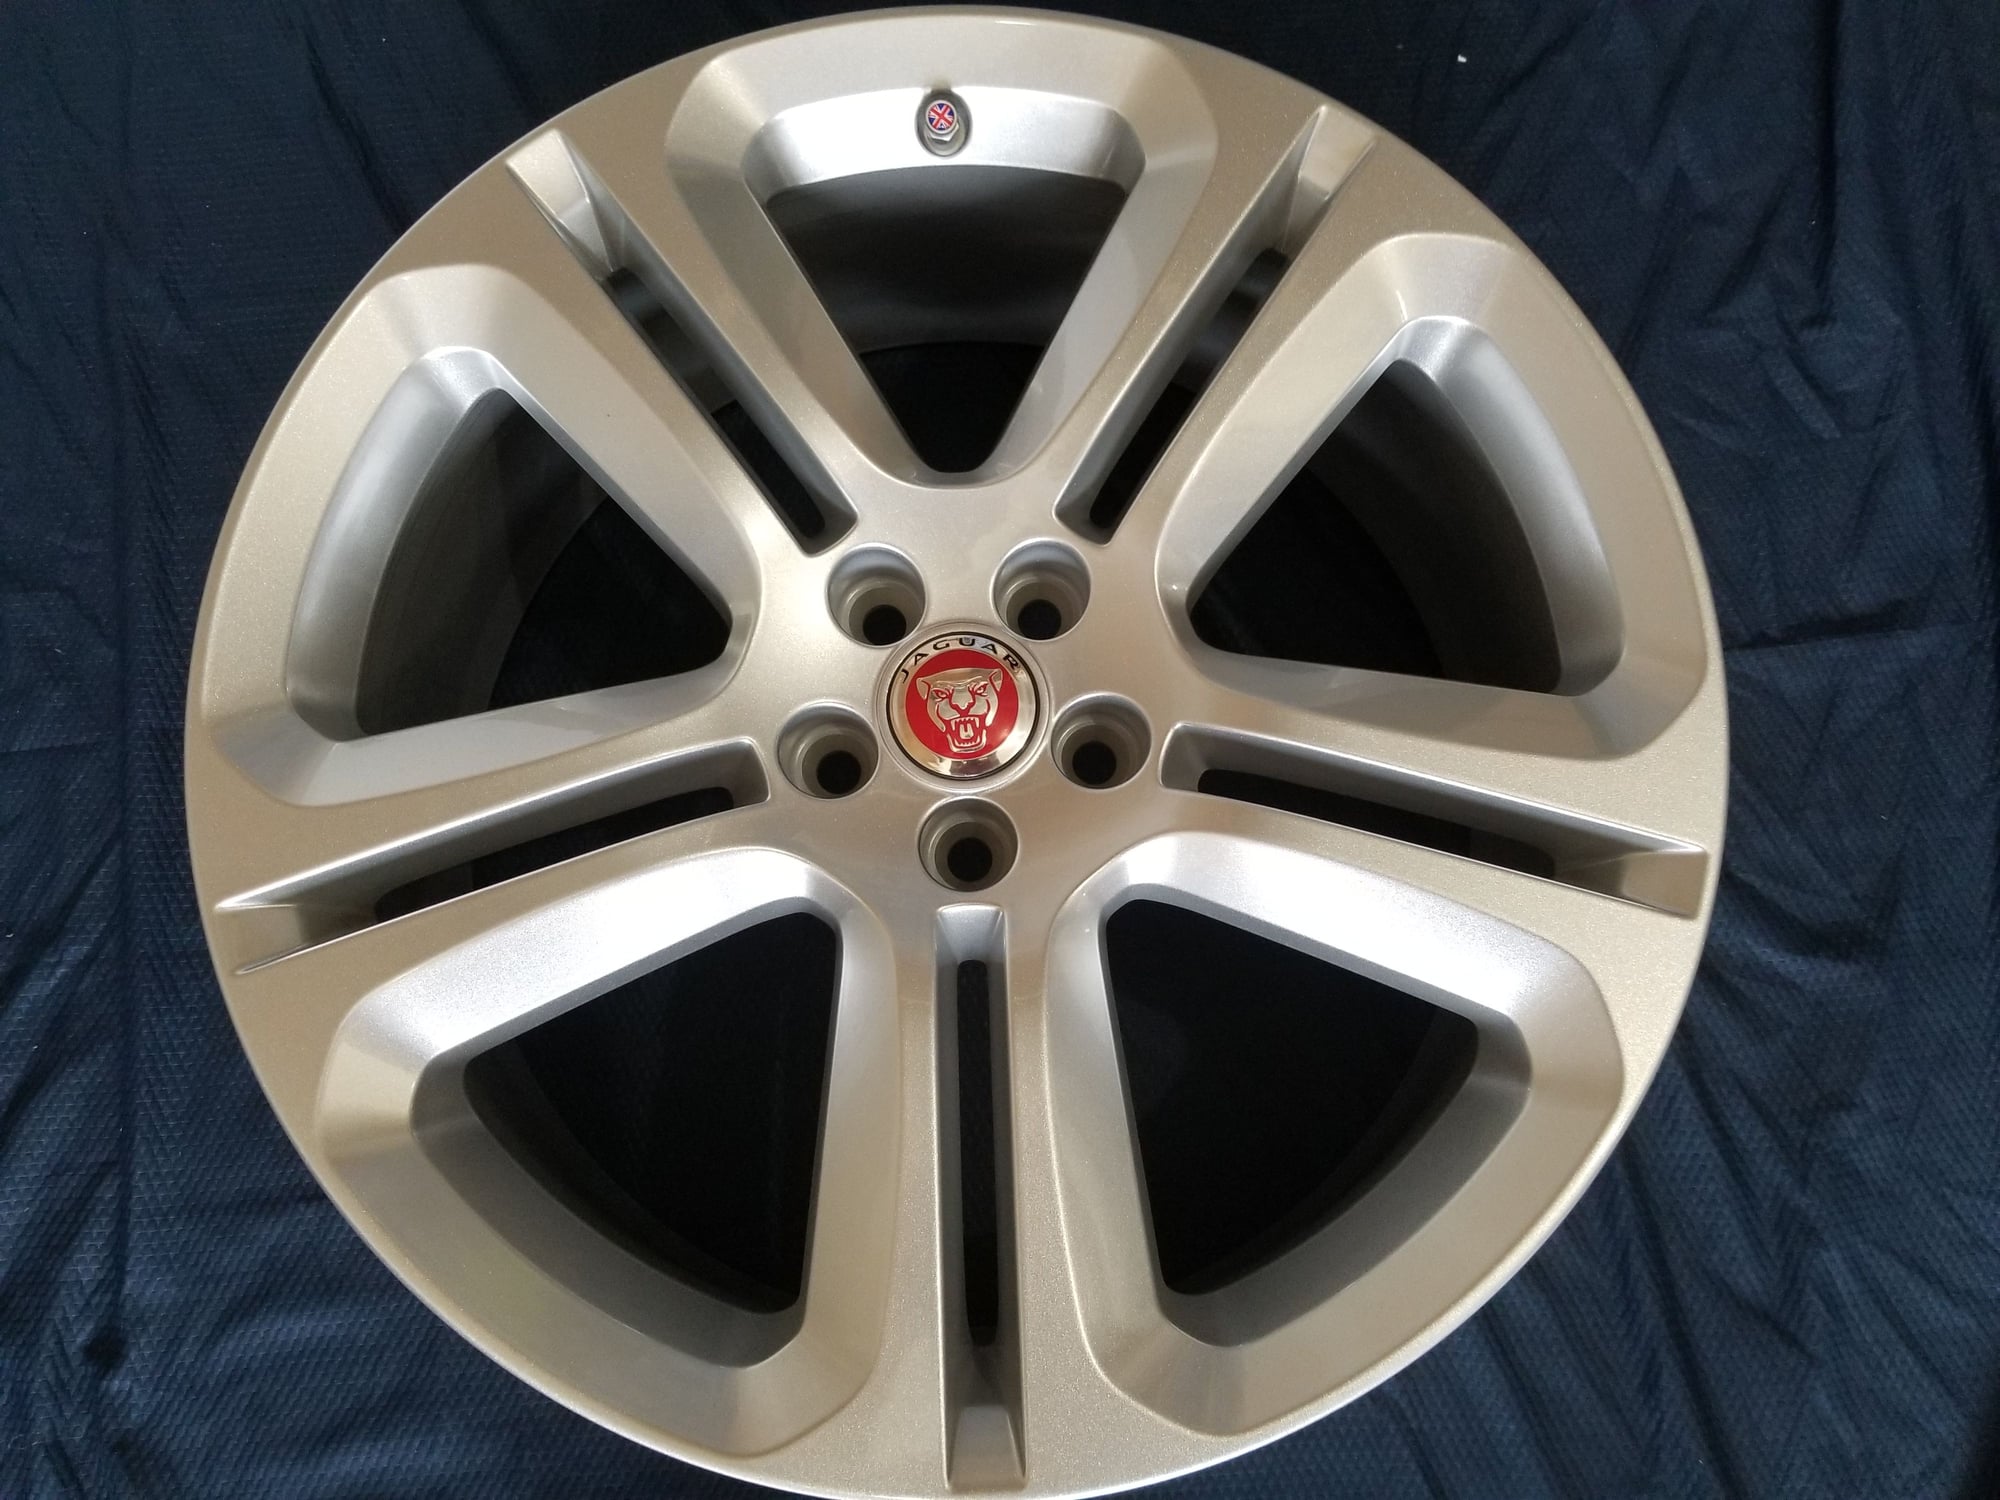 Wheels and Tires/Axles - Jaguar 20 Inch "Templar" Single Rim (Brand new in box) With TPMS - Canada Listing - New - Toronto, ON M4Y1R5, Canada